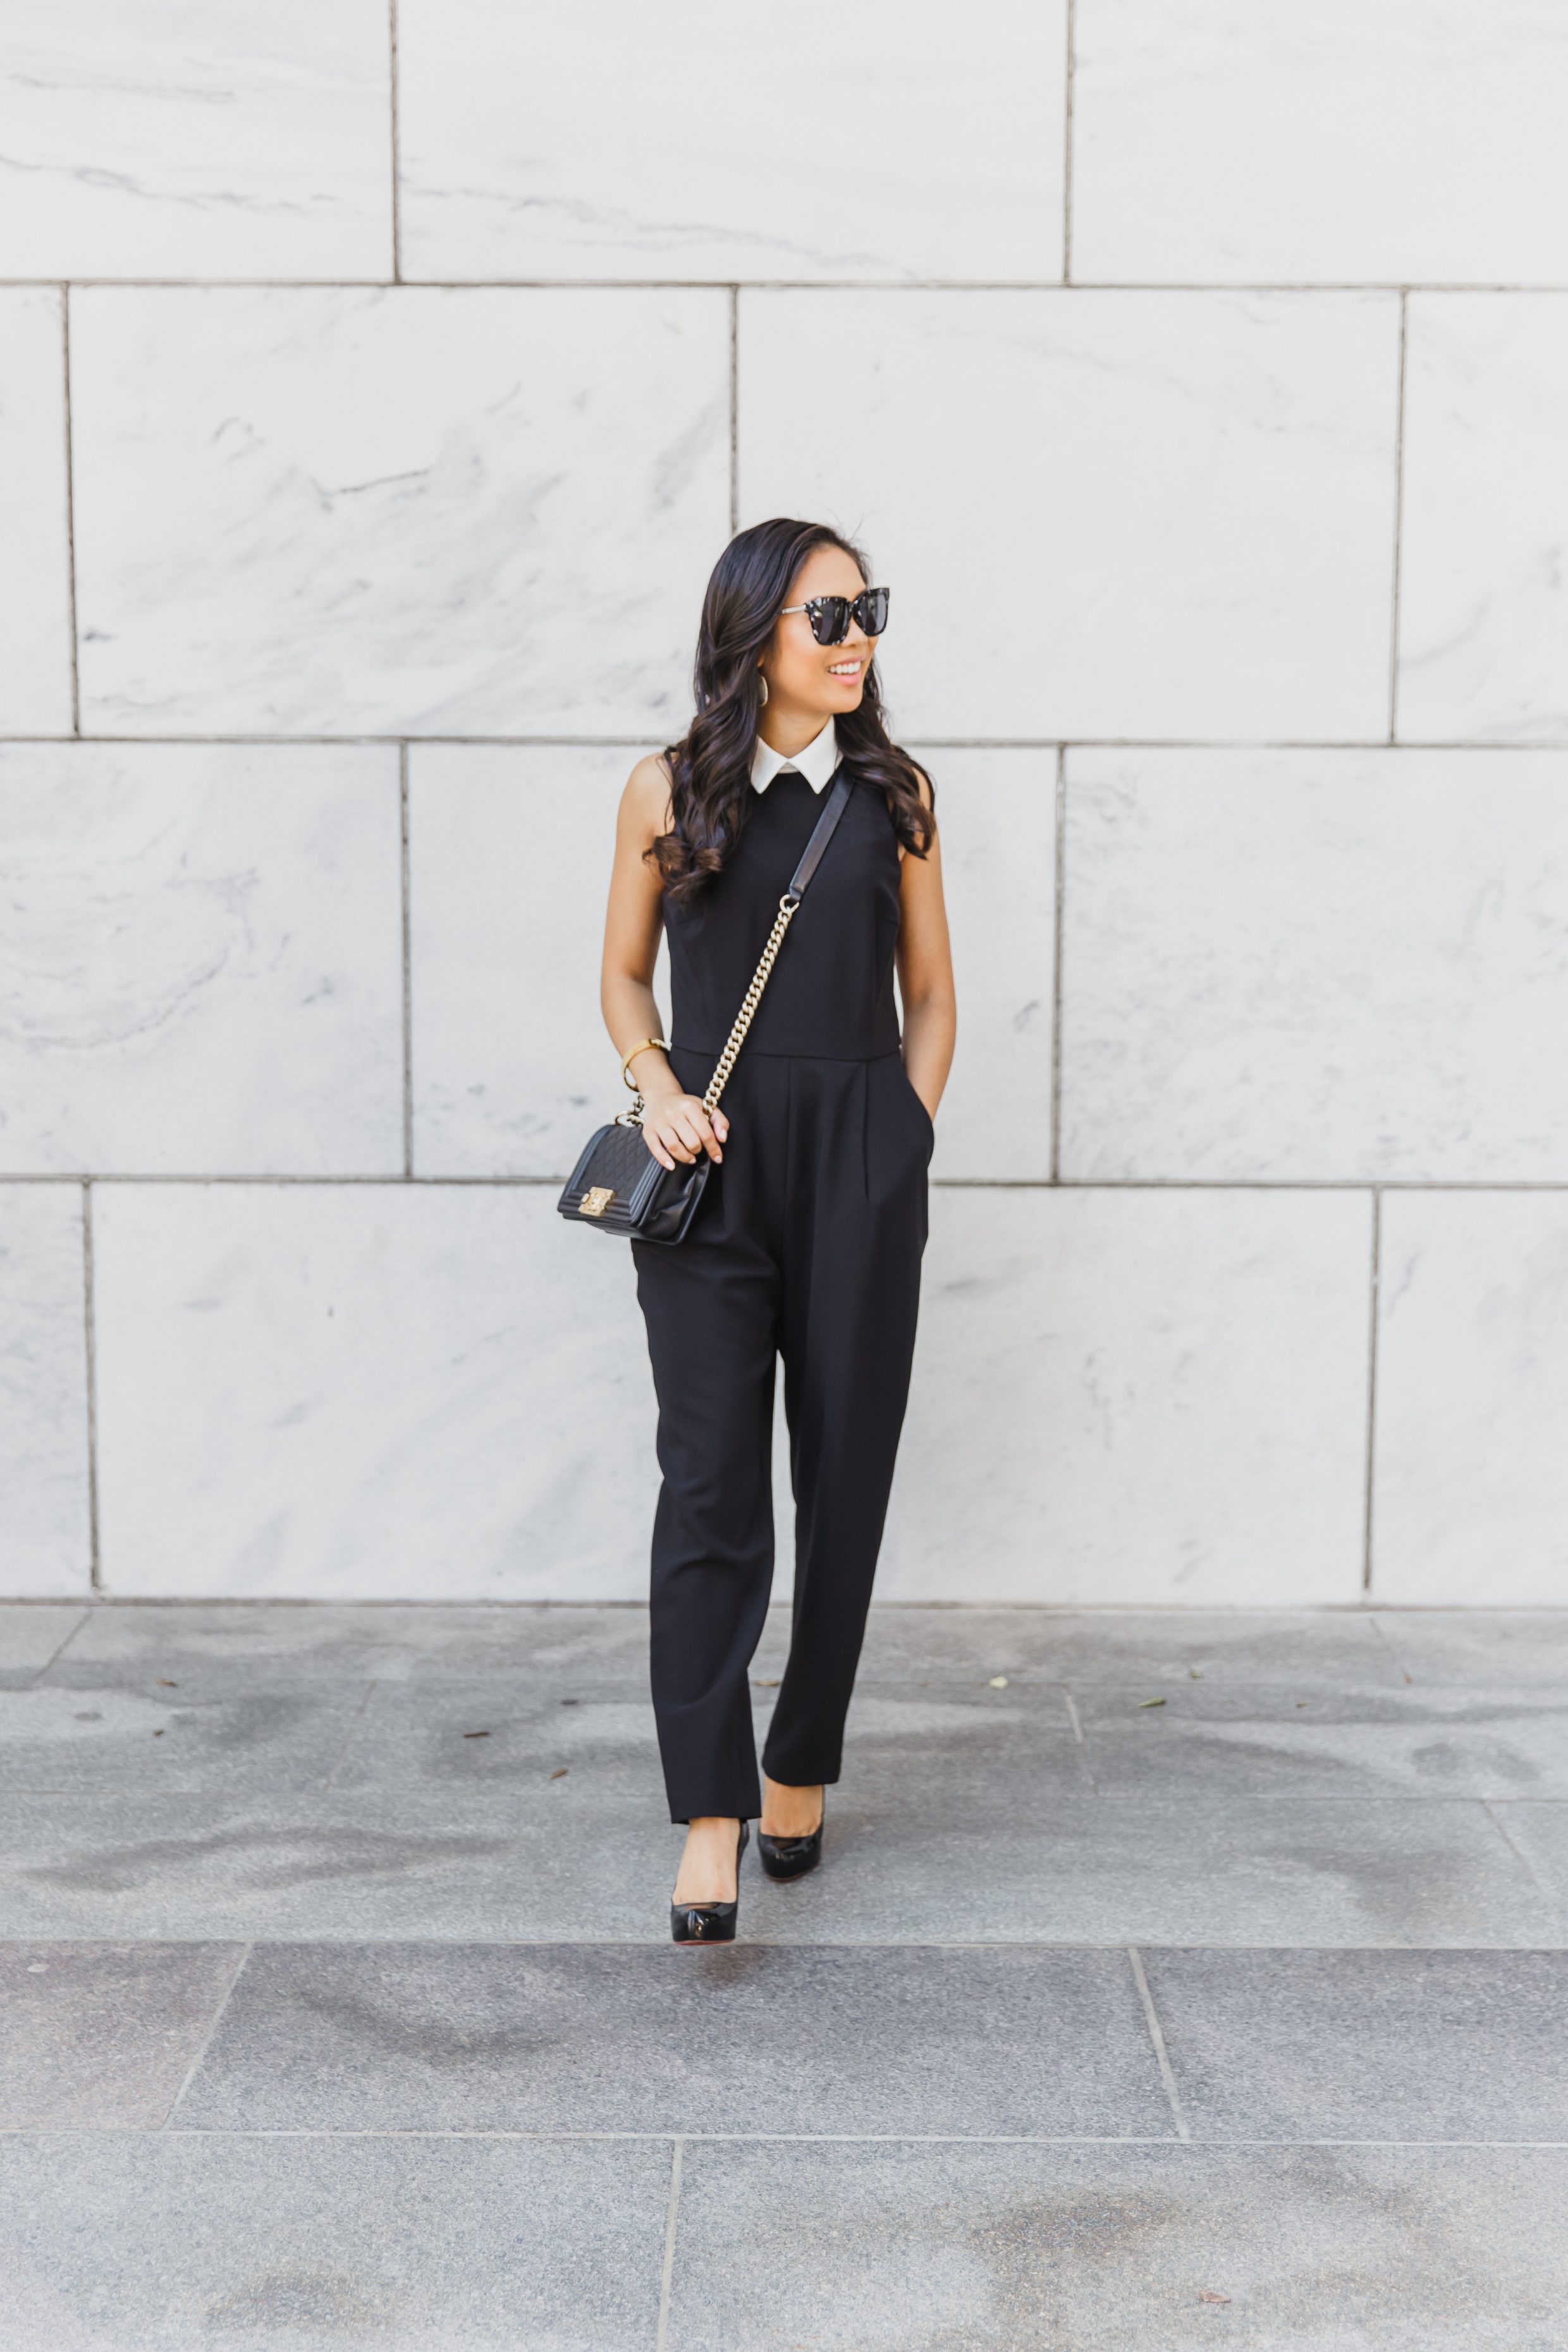 COLOR & CHIC | What I Wear to Work - Black and White Jumpsuit